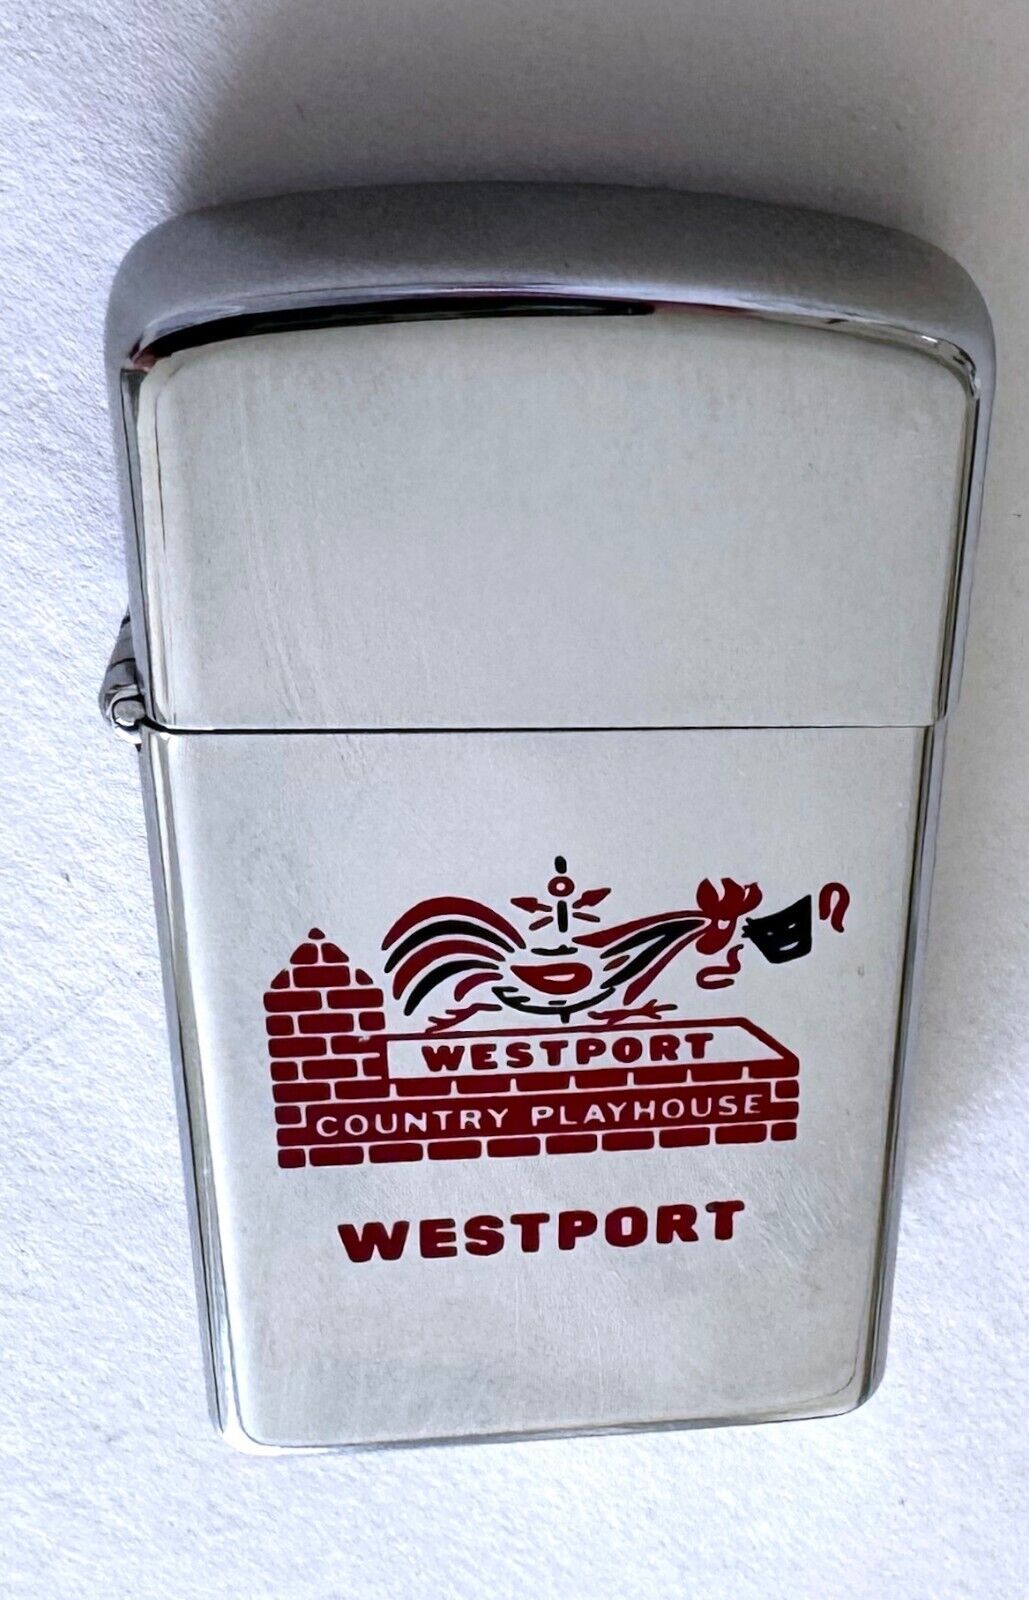 Vintage Polished Chrome Zippo Lighter 1975 Westport Country Playhouse